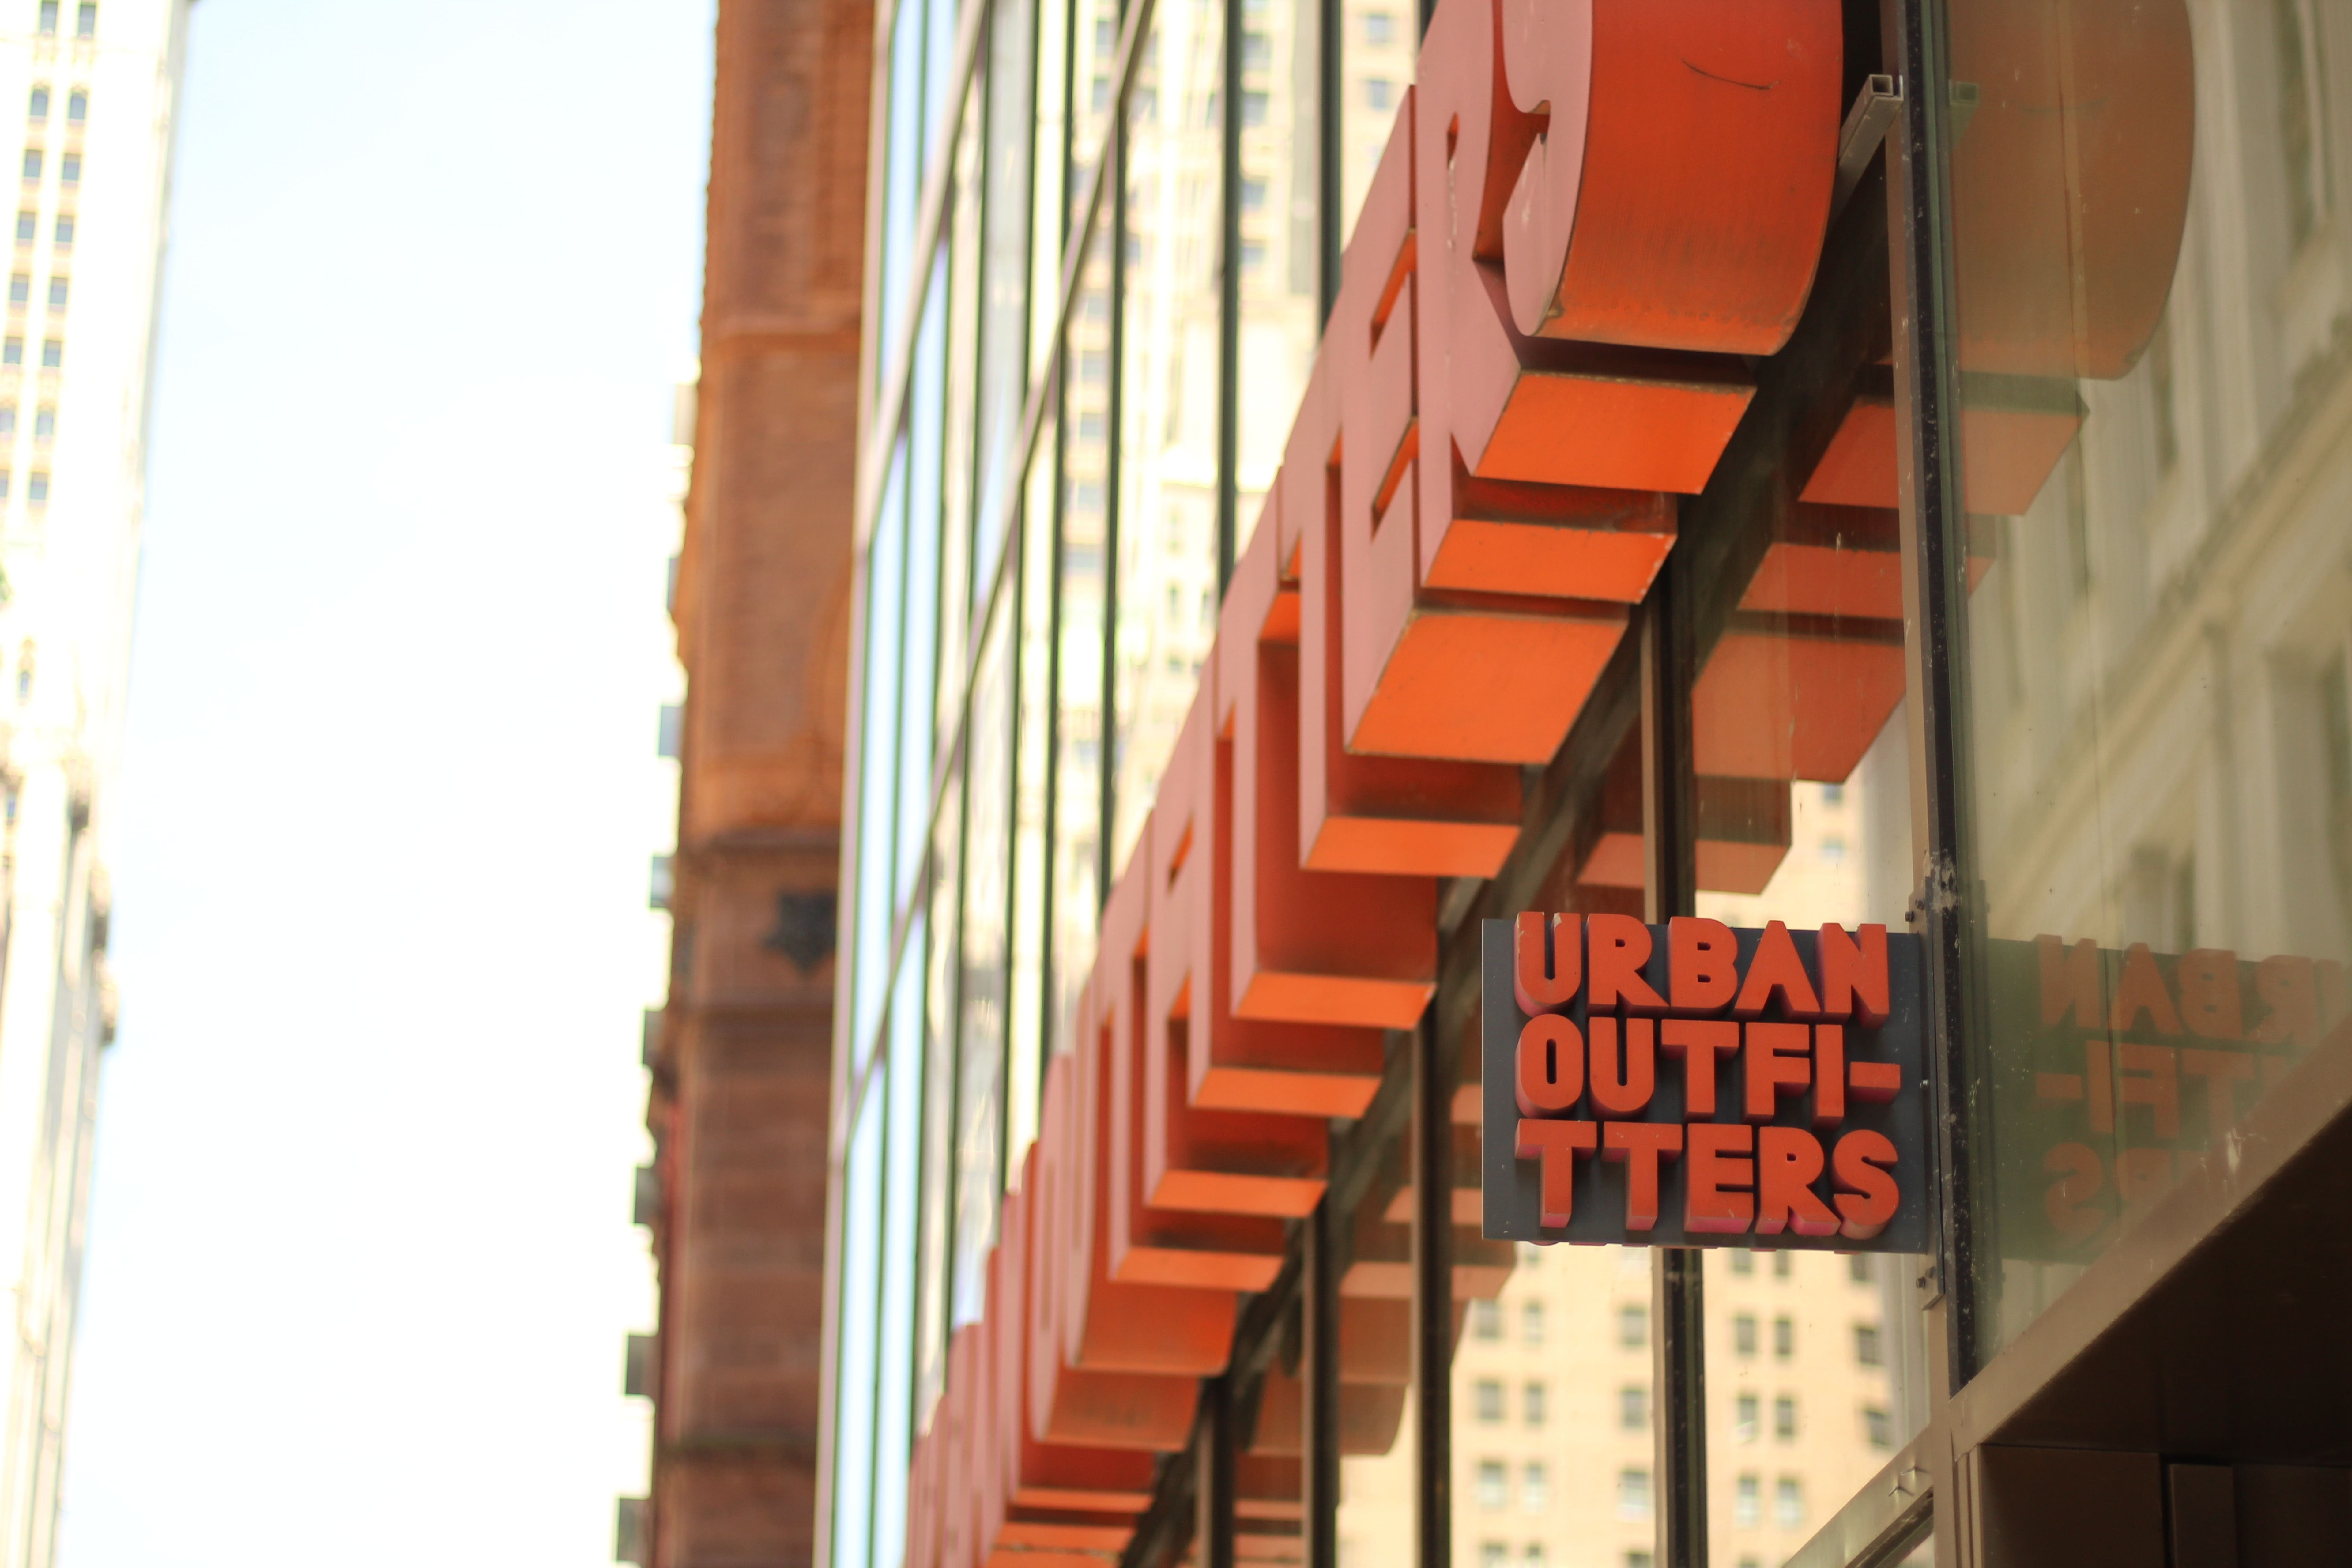 Urban Outfitters Dressed For Success, Gets Upgrade from JPMorgan